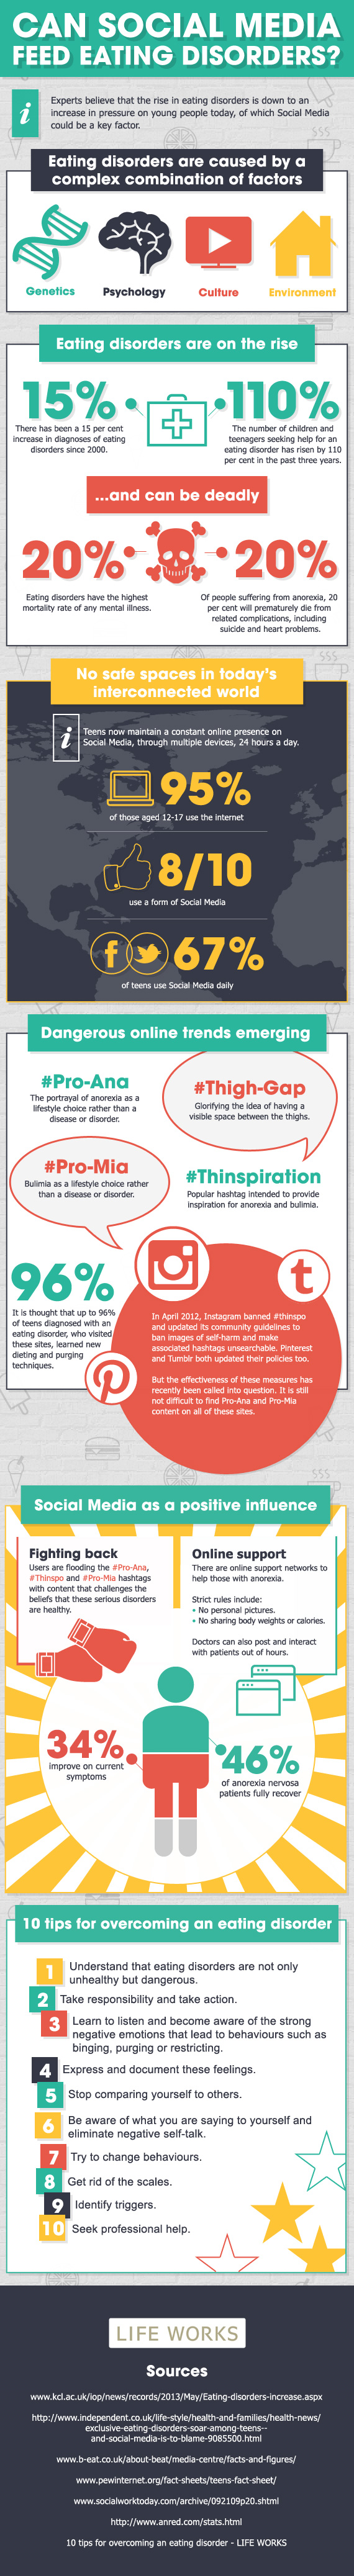 Eating Disorders and Social Media Infographic